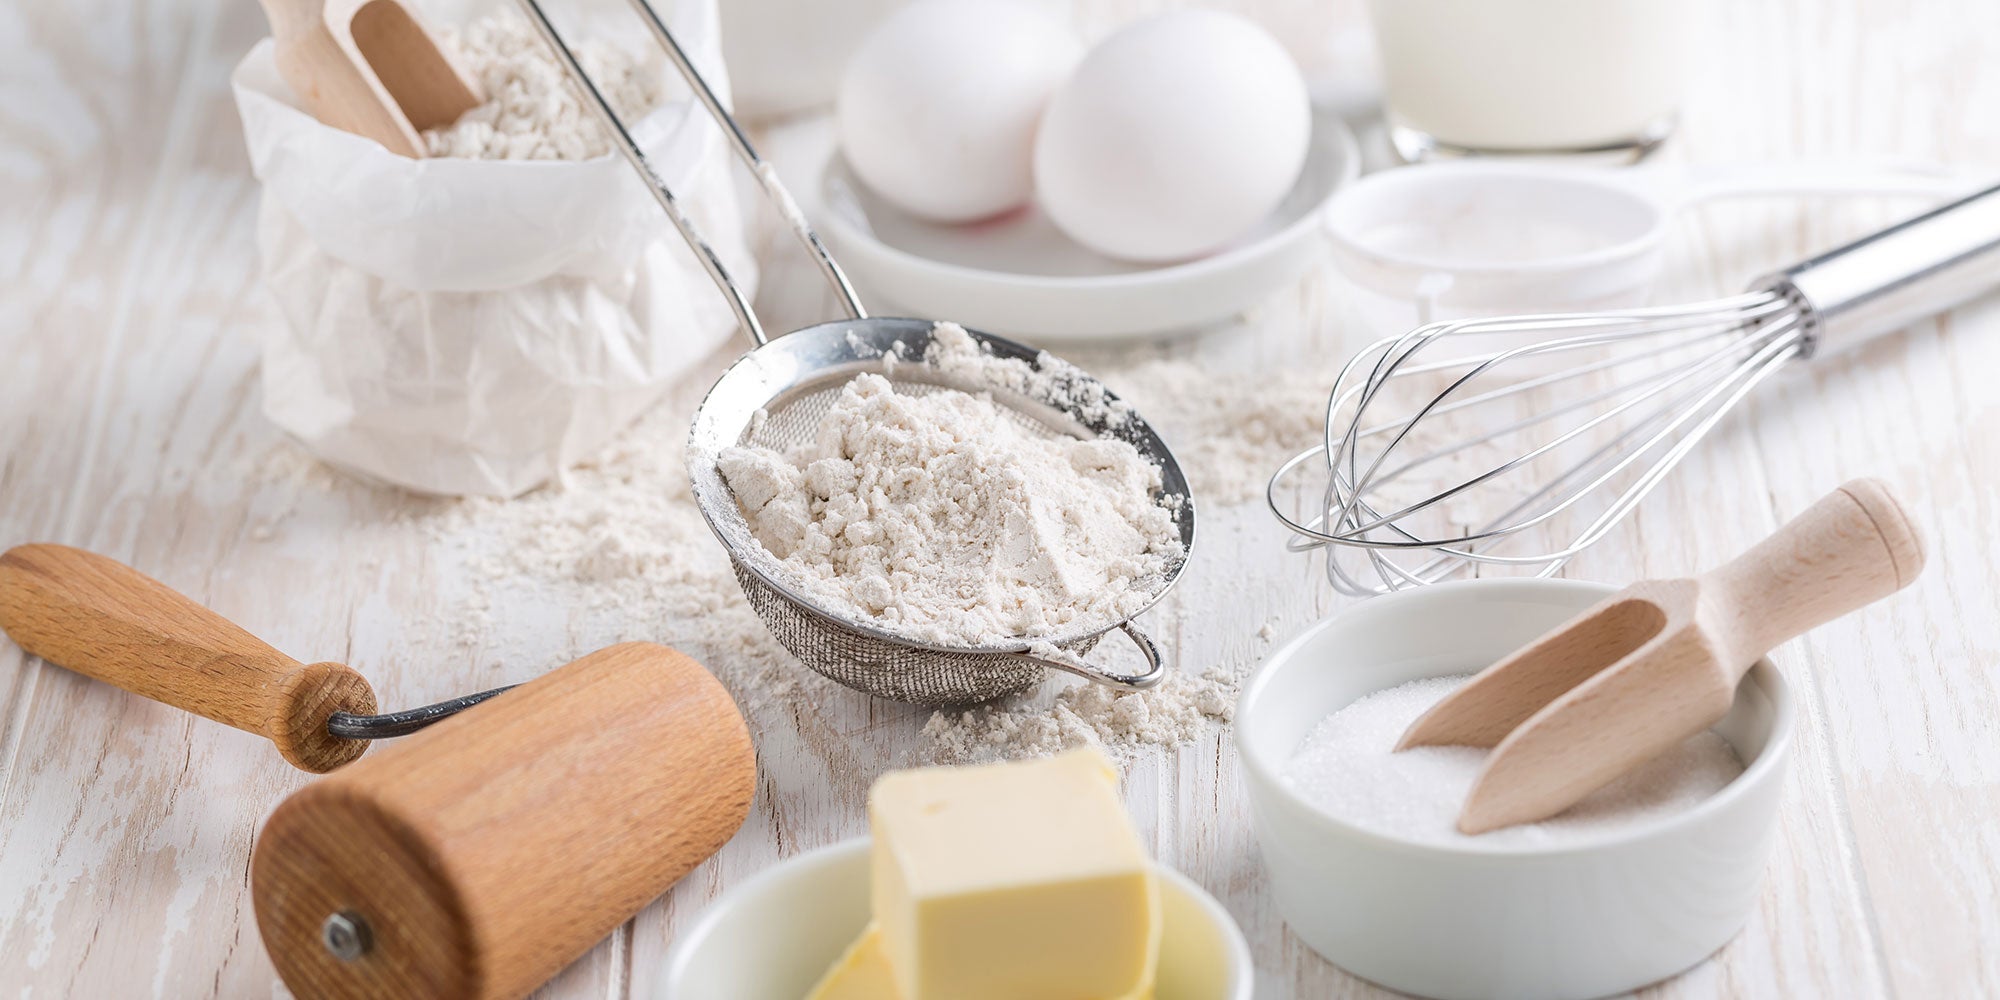 photo of baking ingredients including flour, eggs, butter, sugar